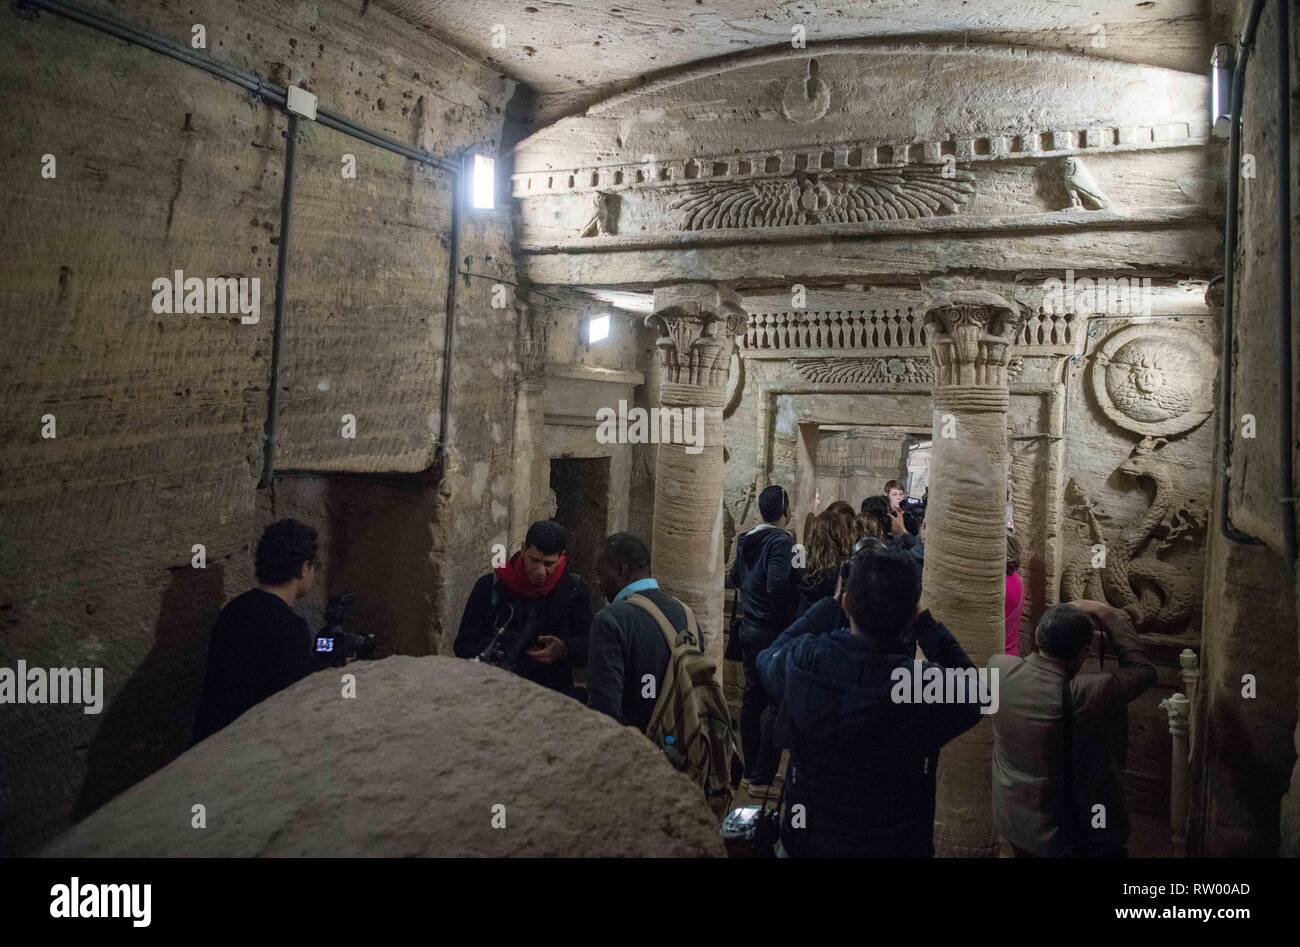 Alexandria, Egypt. 3rd Mar, 2019. Photo taken on March 3, 2019 shows the catacombs of ancient Kom al-Shoqafa tombs in the northern seaside Alexandria province, Egypt. The Egyptian Ministry of Antiquities celebrated on Sunday the completion of a project removing underground water from 2,000-year-old catacombs in the northern seaside province of Alexandria dating back to the Greco-Roman era. Credit: Wu Huiwo/Xinhua/Alamy Live News Stock Photo